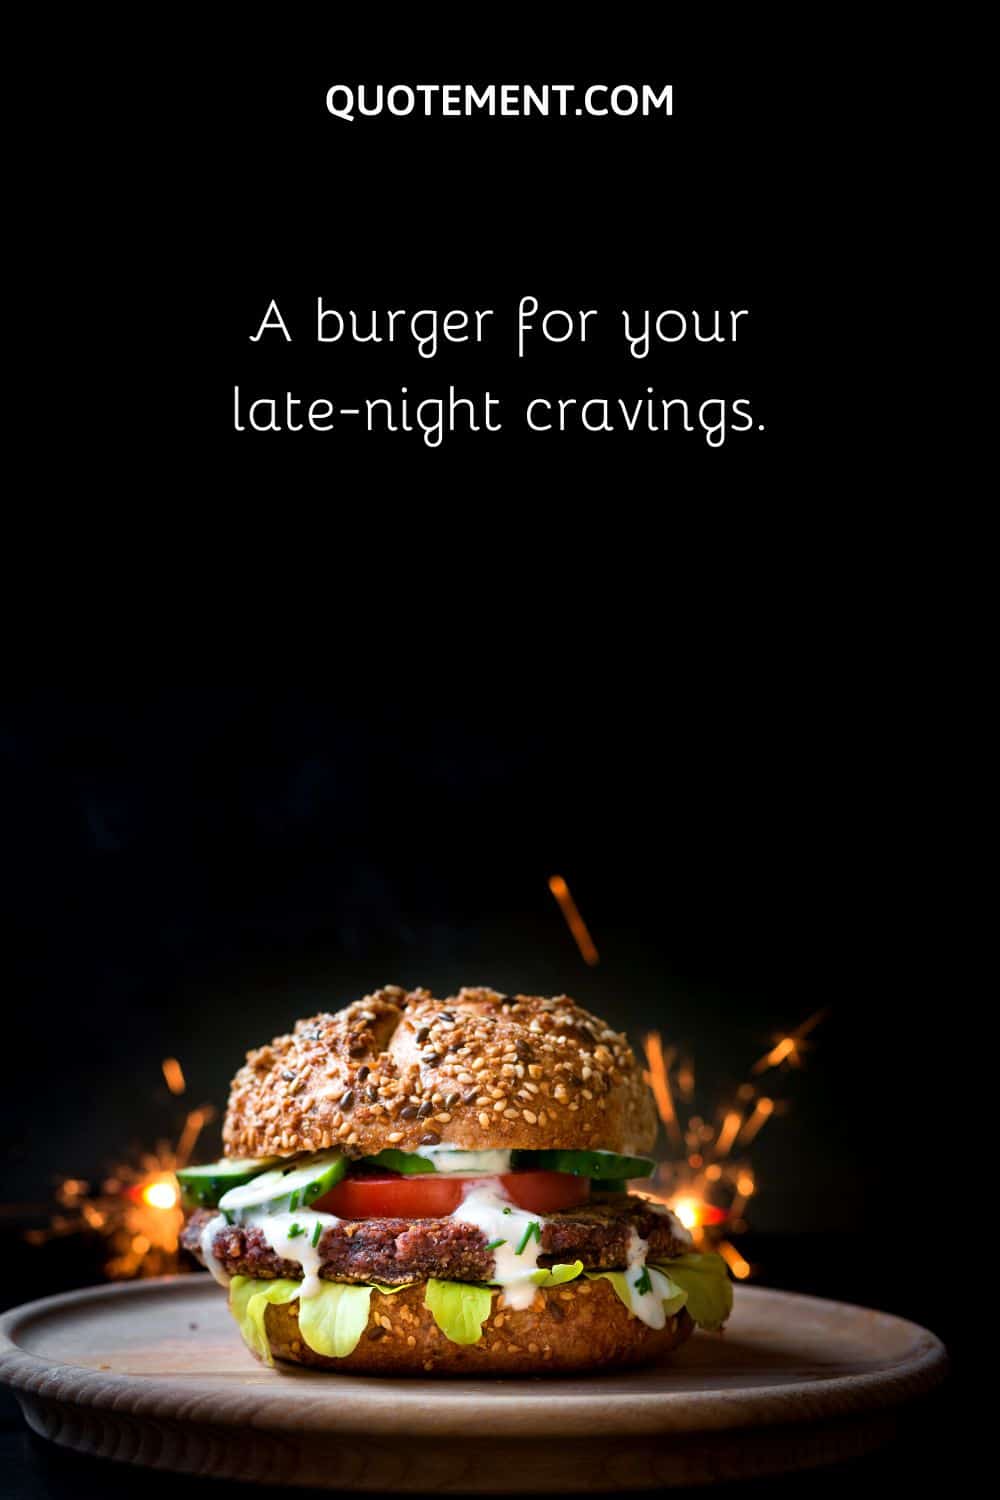 A burger for your late-night cravings.